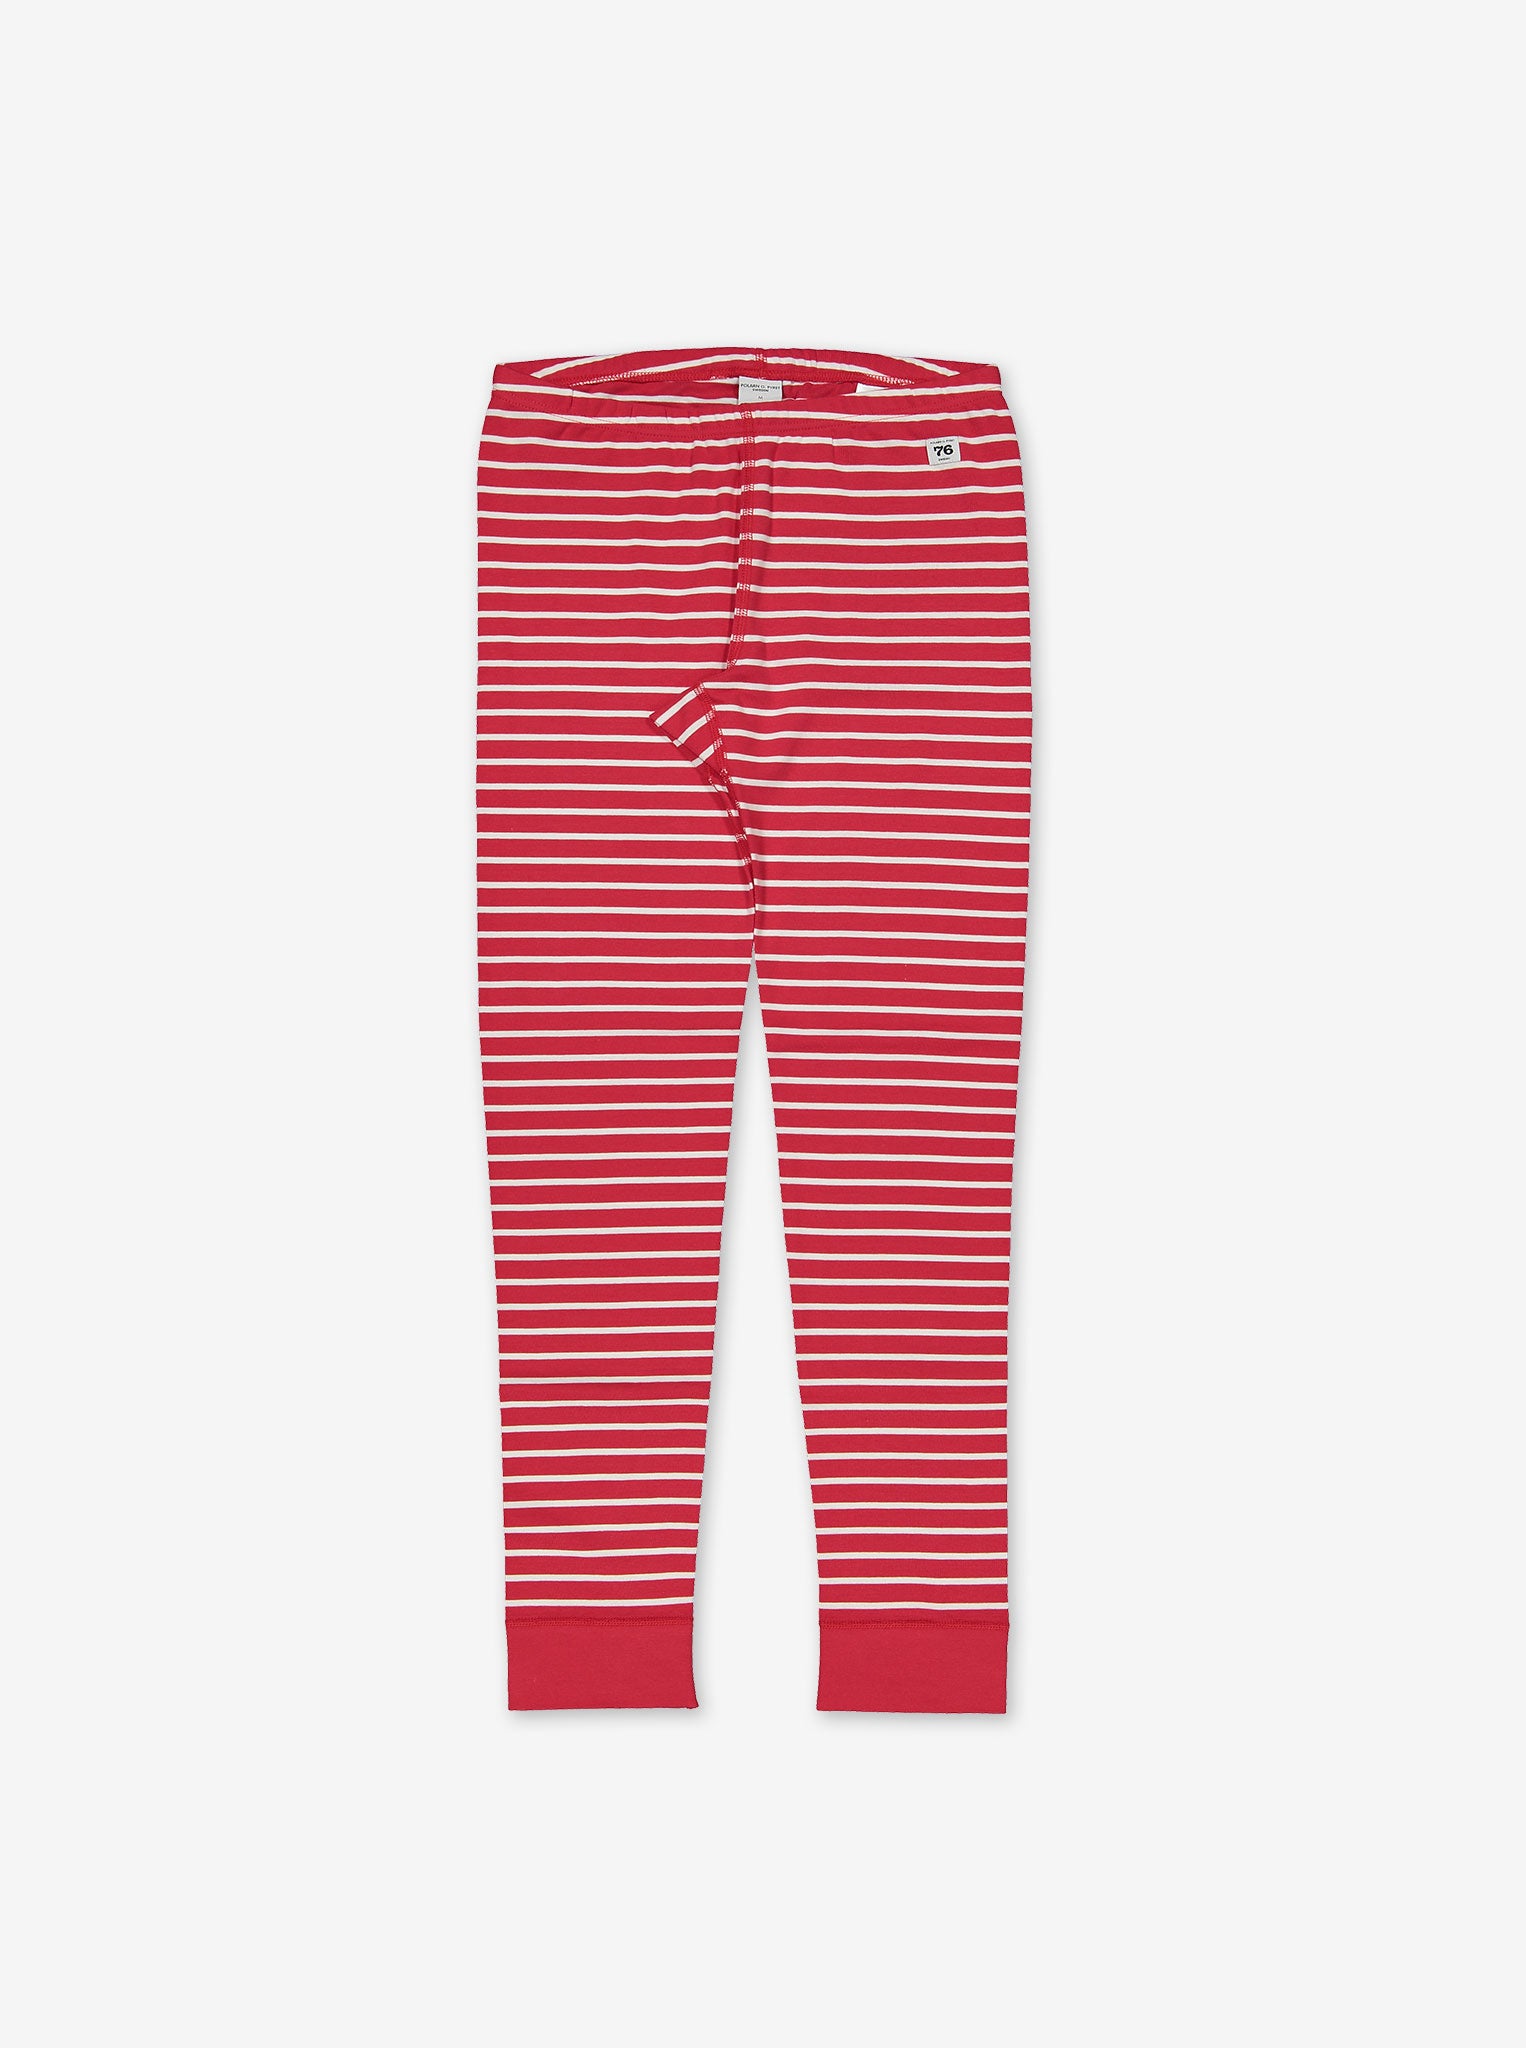 red and white striped adult leggings, organic cotton comfortable polarn o. pyret